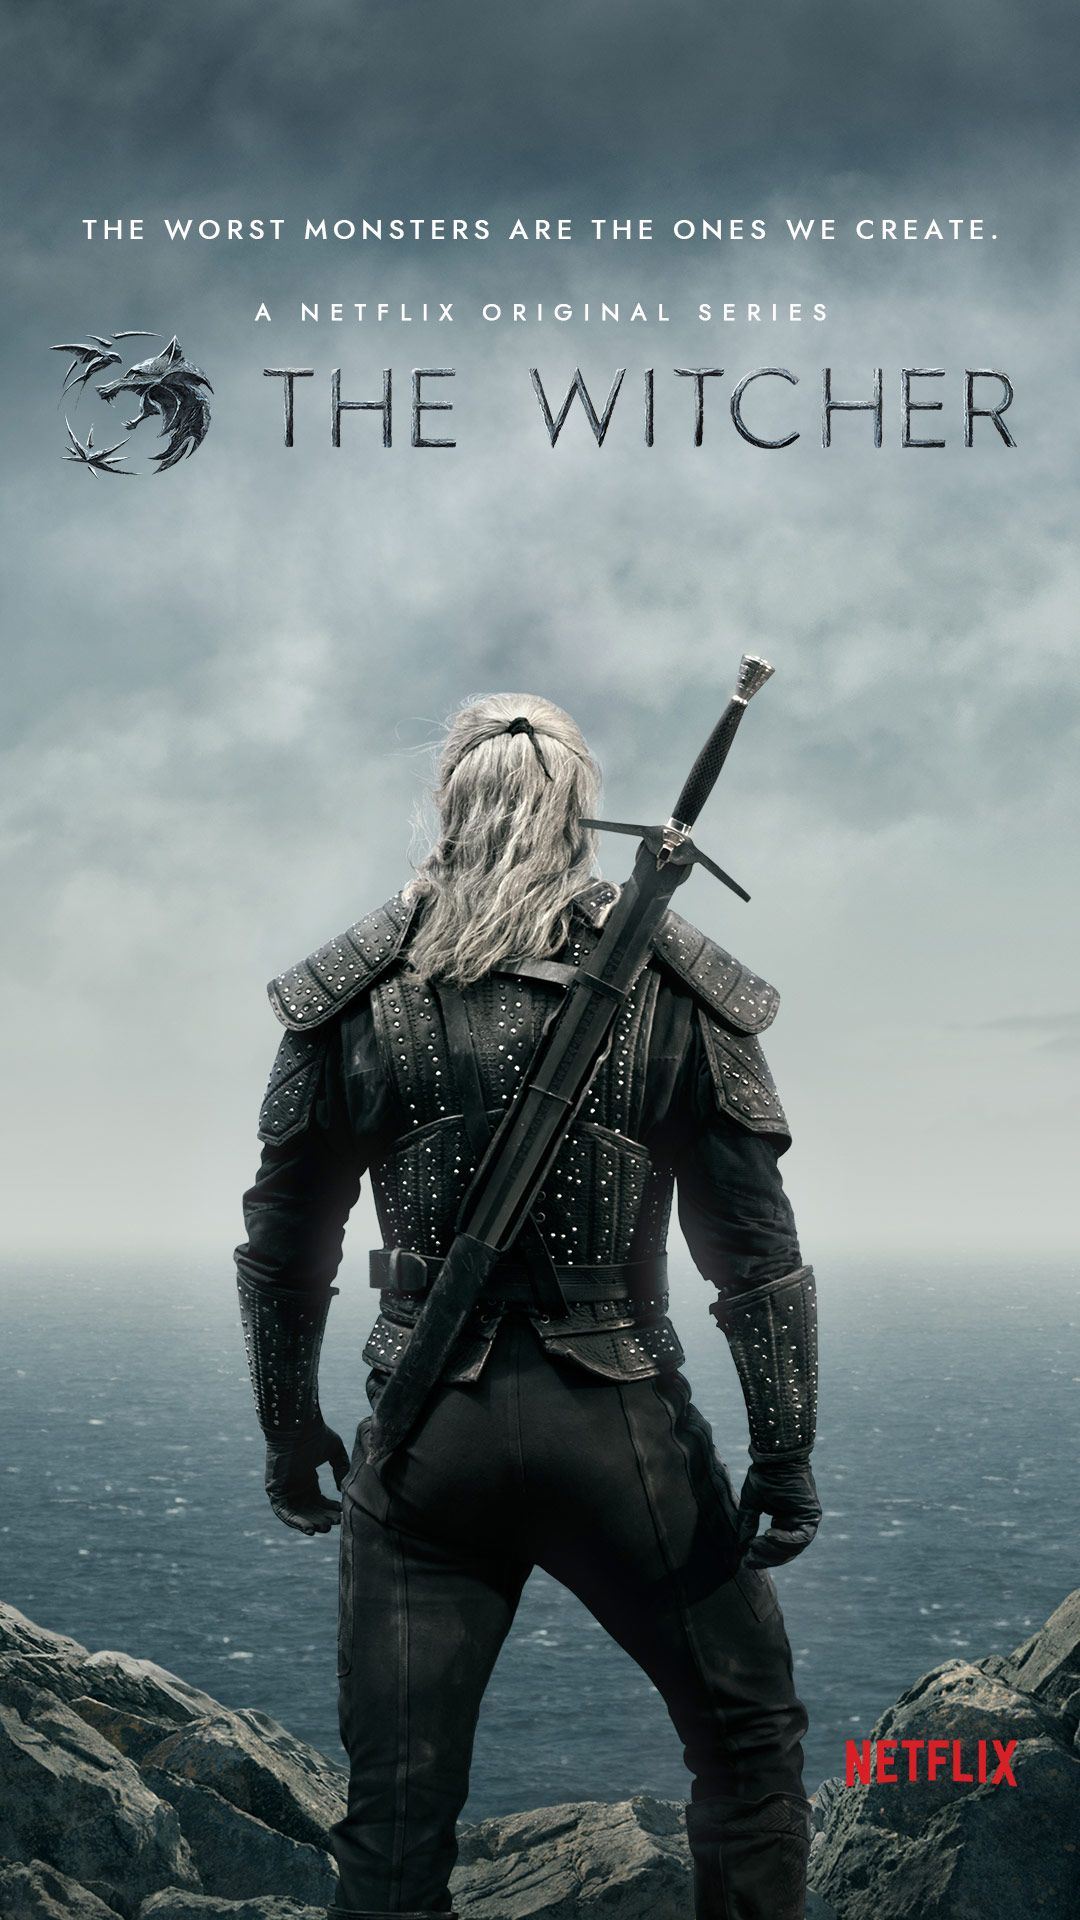 The Witcher Season 4: Release Date, Cast, & Updates We Know So Far - AWBI